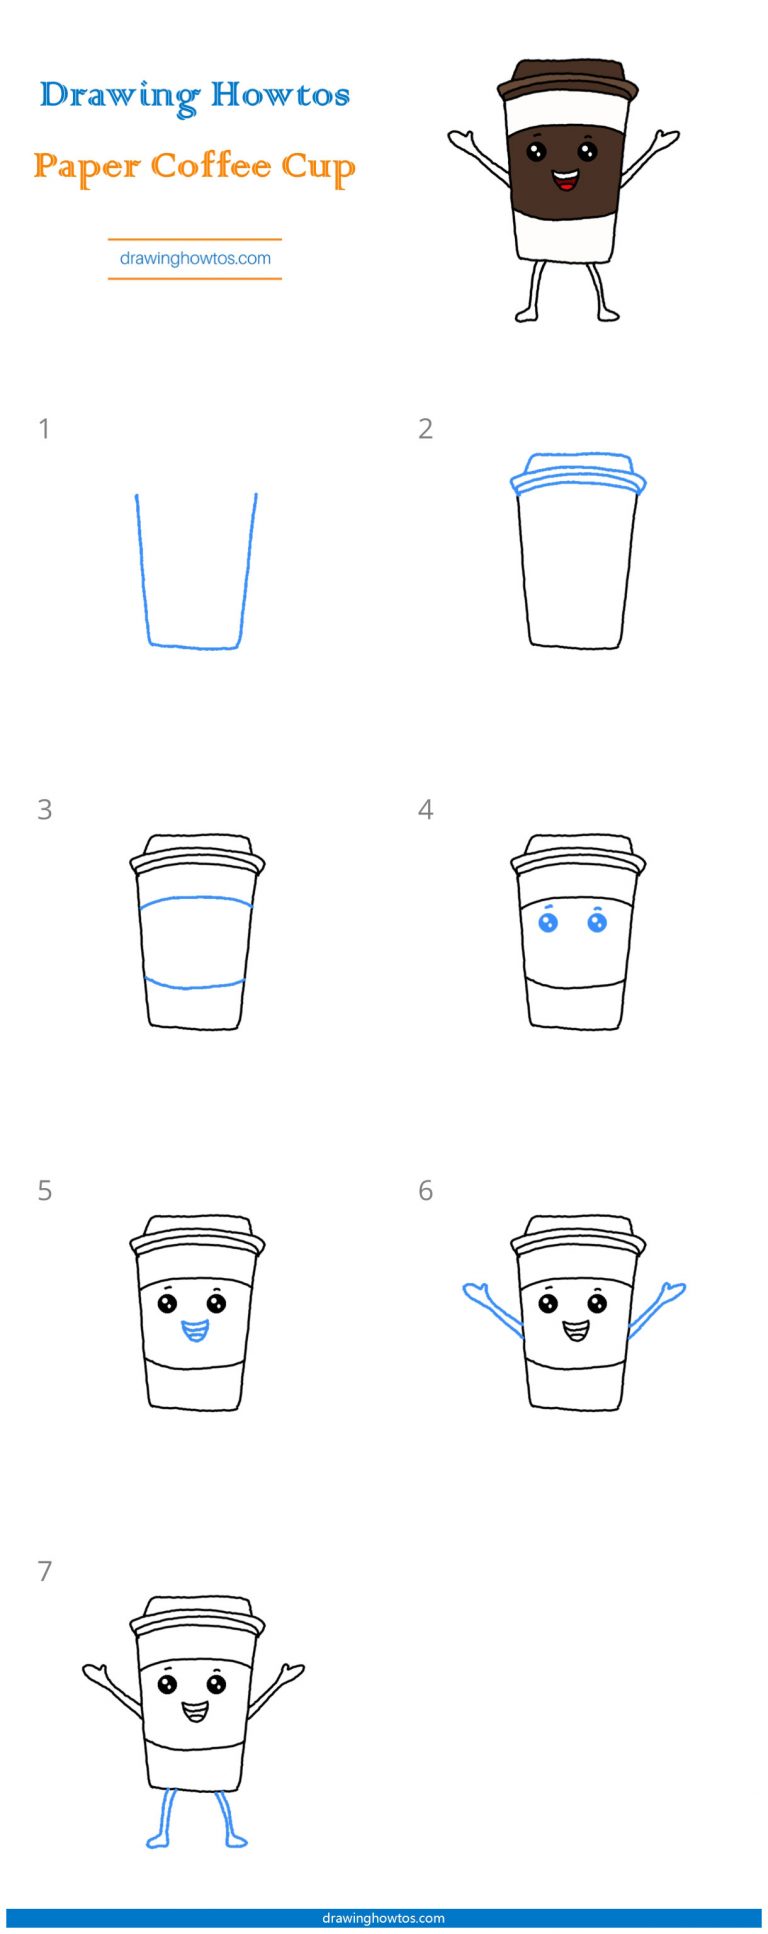 How to Draw a Paper Coffee Cup - Step by Step Easy Drawing Guides ...